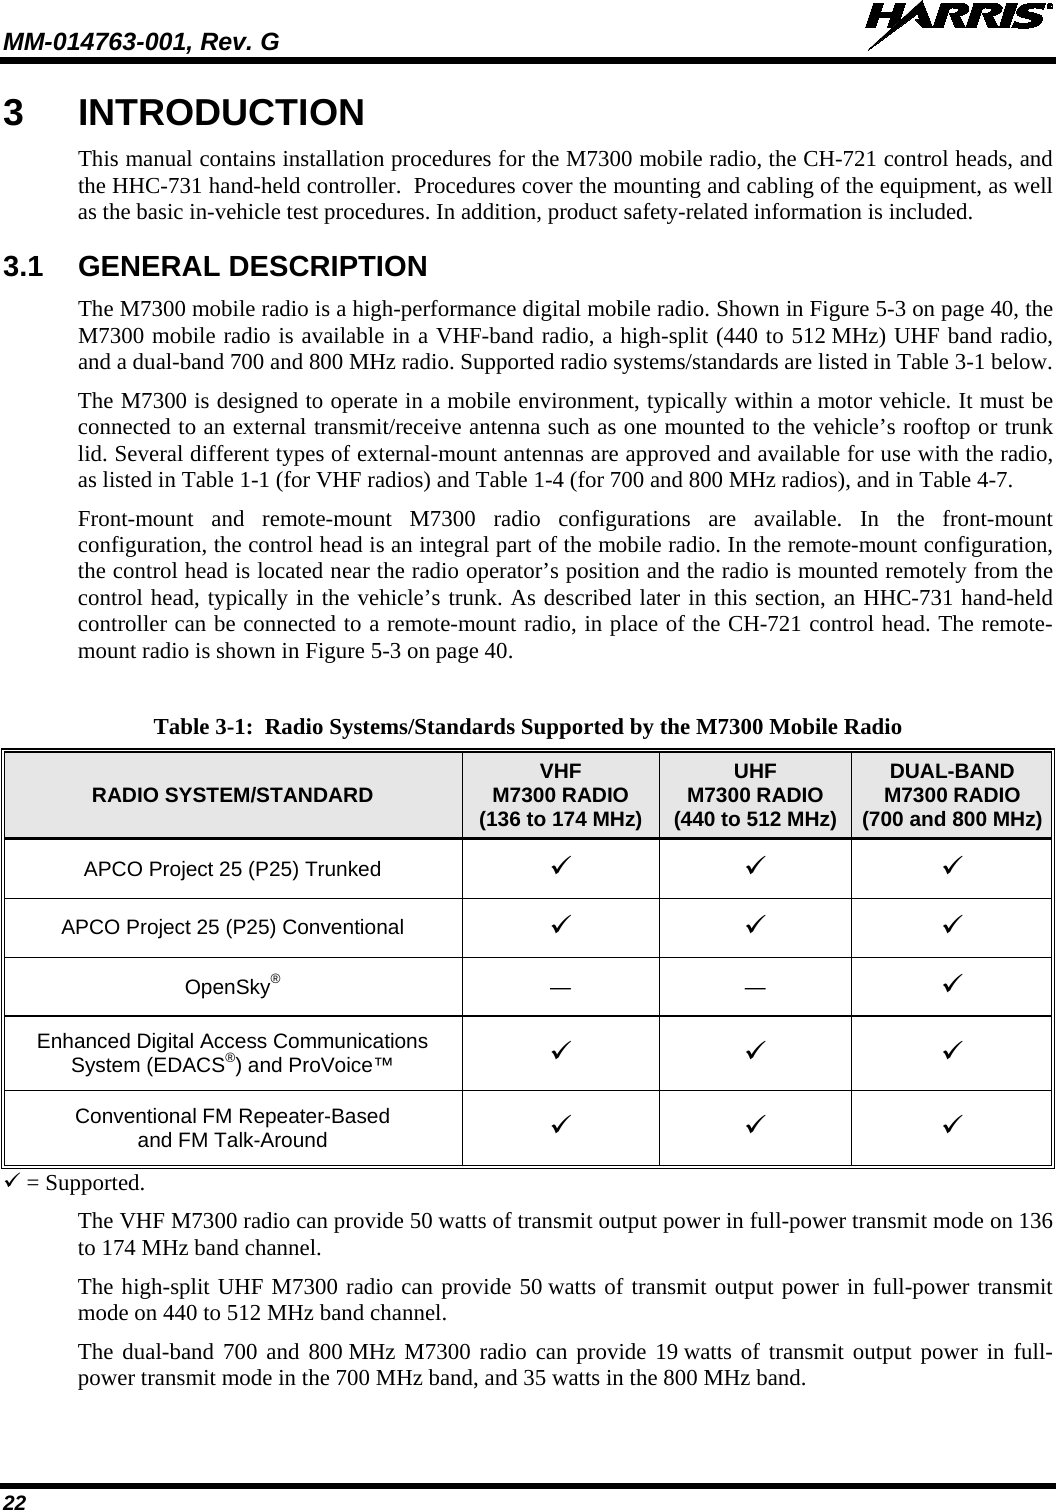 MM-014763-001, Rev. G   22 3  INTRODUCTION This manual contains installation procedures for the M7300 mobile radio, the CH-721 control heads, and the HHC-731 hand-held controller.  Procedures cover the mounting and cabling of the equipment, as well as the basic in-vehicle test procedures. In addition, product safety-related information is included. 3.1 GENERAL DESCRIPTION The M7300 mobile radio is a high-performance digital mobile radio. Shown in Figure 5-3 on page 40, the M7300 mobile radio is available in a VHF-band radio, a high-split (440 to 512 MHz) UHF band radio, and a dual-band 700 and 800 MHz radio. Supported radio systems/standards are listed in Table 3-1 below. The M7300 is designed to operate in a mobile environment, typically within a motor vehicle. It must be connected to an external transmit/receive antenna such as one mounted to the vehicle’s rooftop or trunk lid. Several different types of external-mount antennas are approved and available for use with the radio, as listed in Table 1-1 (for VHF radios) and Table 1-4 (for 700 and 800 MHz radios), and in Table 4-7. Front-mount and remote-mount  M7300 radio configurations are available. In the front-mount configuration, the control head is an integral part of the mobile radio. In the remote-mount configuration, the control head is located near the radio operator’s position and the radio is mounted remotely from the control head, typically in the vehicle’s trunk. As described later in this section, an HHC-731 hand-held controller can be connected to a remote-mount radio, in place of the CH-721 control head. The remote-mount radio is shown in Figure 5-3 on page 40. Table 3-1:  Radio Systems/Standards Supported by the M7300 Mobile Radio RADIO SYSTEM/STANDARD VHF M7300 RADIO (136 to 174 MHz) UHF M7300 RADIO (440 to 512 MHz) DUAL-BAND M7300 RADIO (700 and 800 MHz) APCO Project 25 (P25) Trunked    APCO Project 25 (P25) Conventional    OpenSky®  —  —   Enhanced Digital Access Communications System (EDACS®) and ProVoice™     Conventional FM Repeater-Based and FM Talk-Around     = Supported. The VHF M7300 radio can provide 50 watts of transmit output power in full-power transmit mode on 136 to 174 MHz band channel. The high-split UHF M7300 radio can provide 50 watts of transmit output power in full-power transmit mode on 440 to 512 MHz band channel. The dual-band 700 and 800 MHz M7300 radio can provide 19 watts of transmit output power in full-power transmit mode in the 700 MHz band, and 35 watts in the 800 MHz band. 